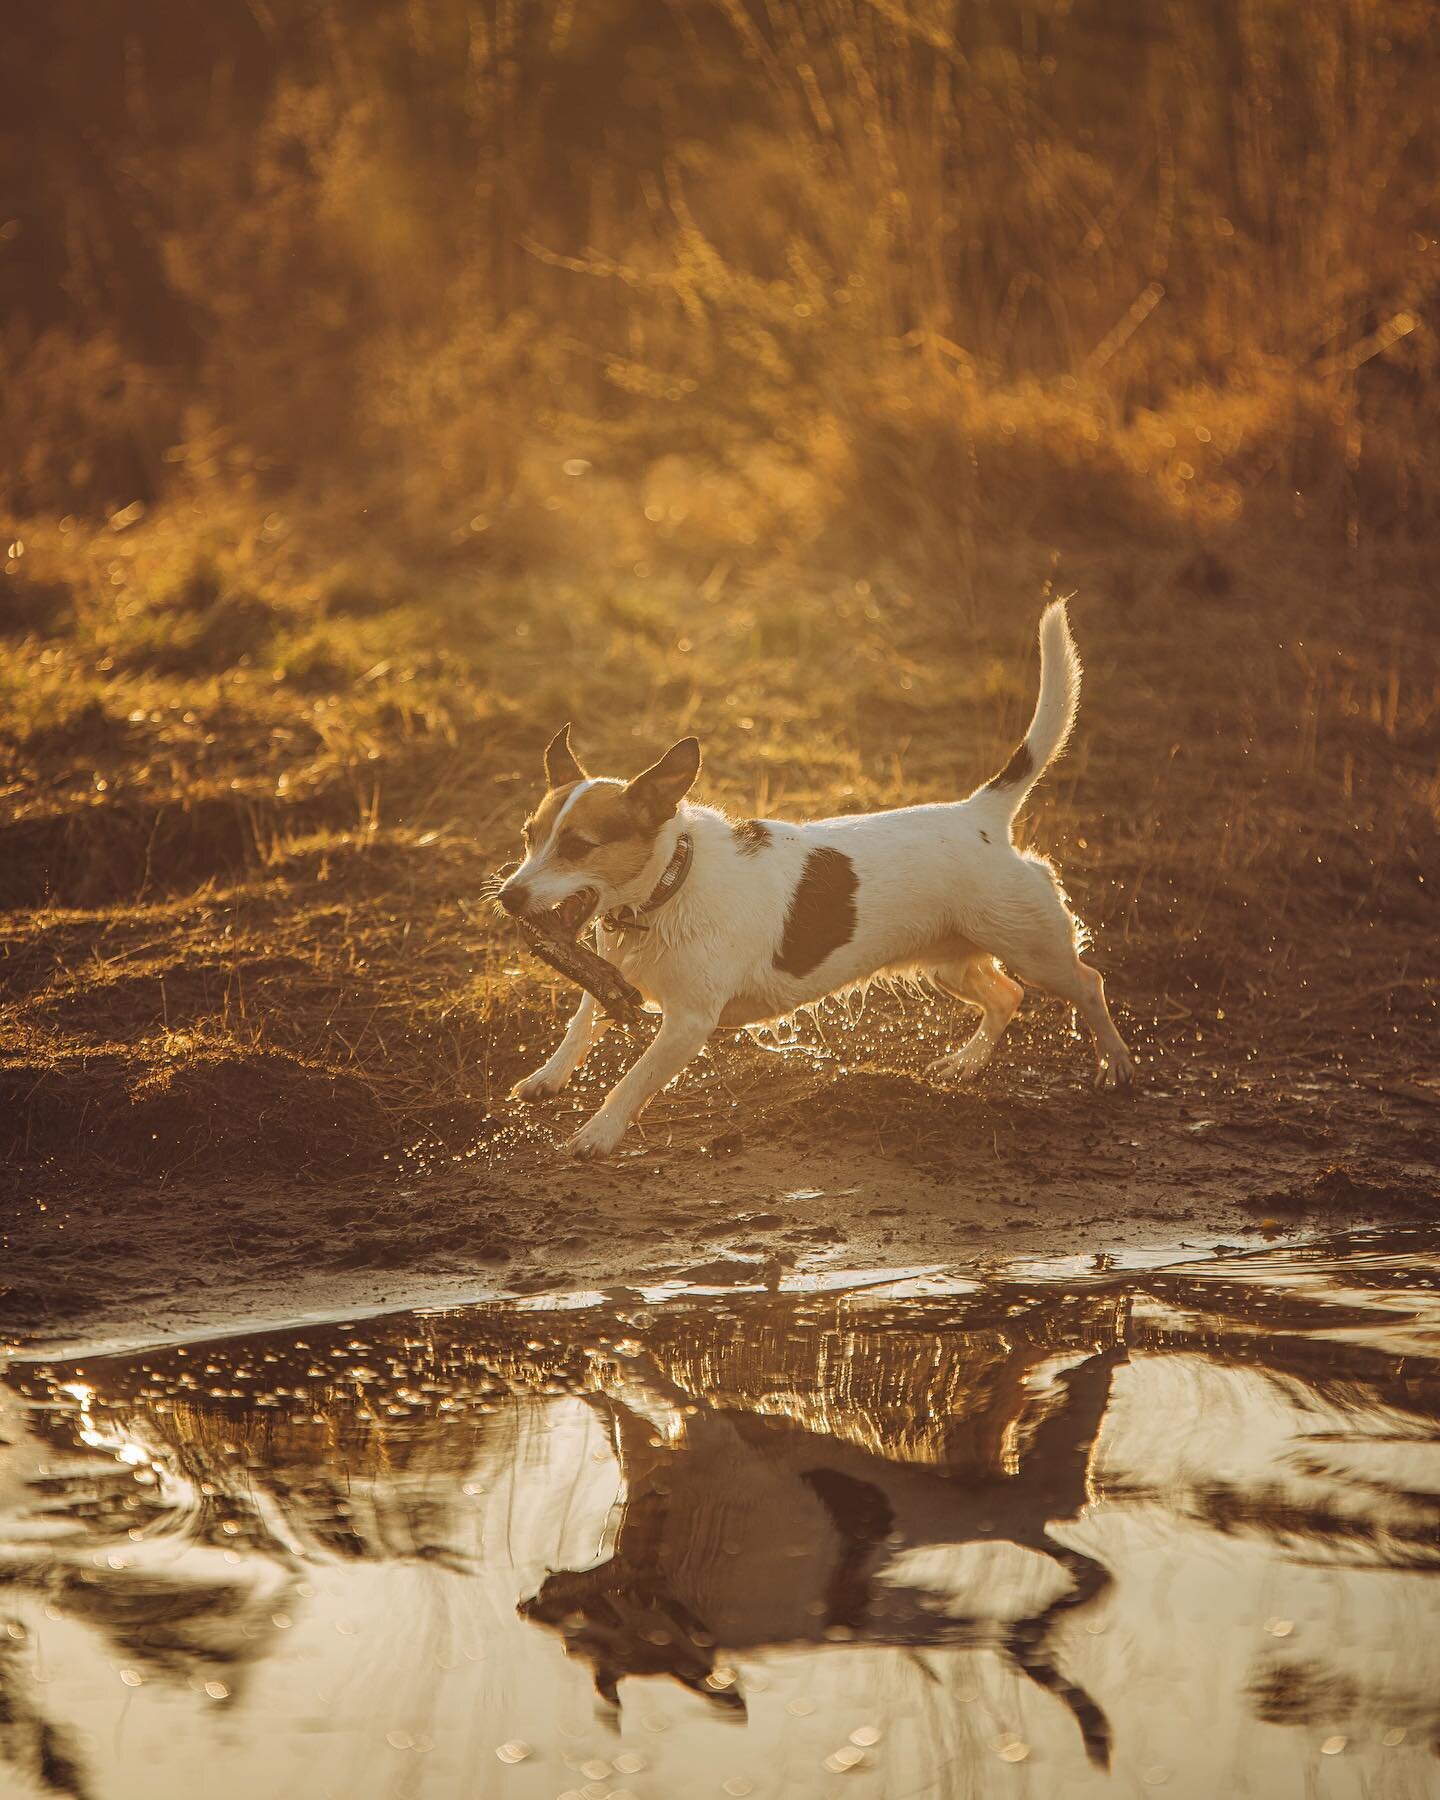 So, apparently @pippywiggle has been a little put out that she hasn&rsquo;t featured lately... here she is, modelling the best in &ldquo;late winter&rdquo; looks, the dripping dog!
&bull;
&bull;
&bull;
&bull;
&bull;
#goldenhour #jackrussell #nature #